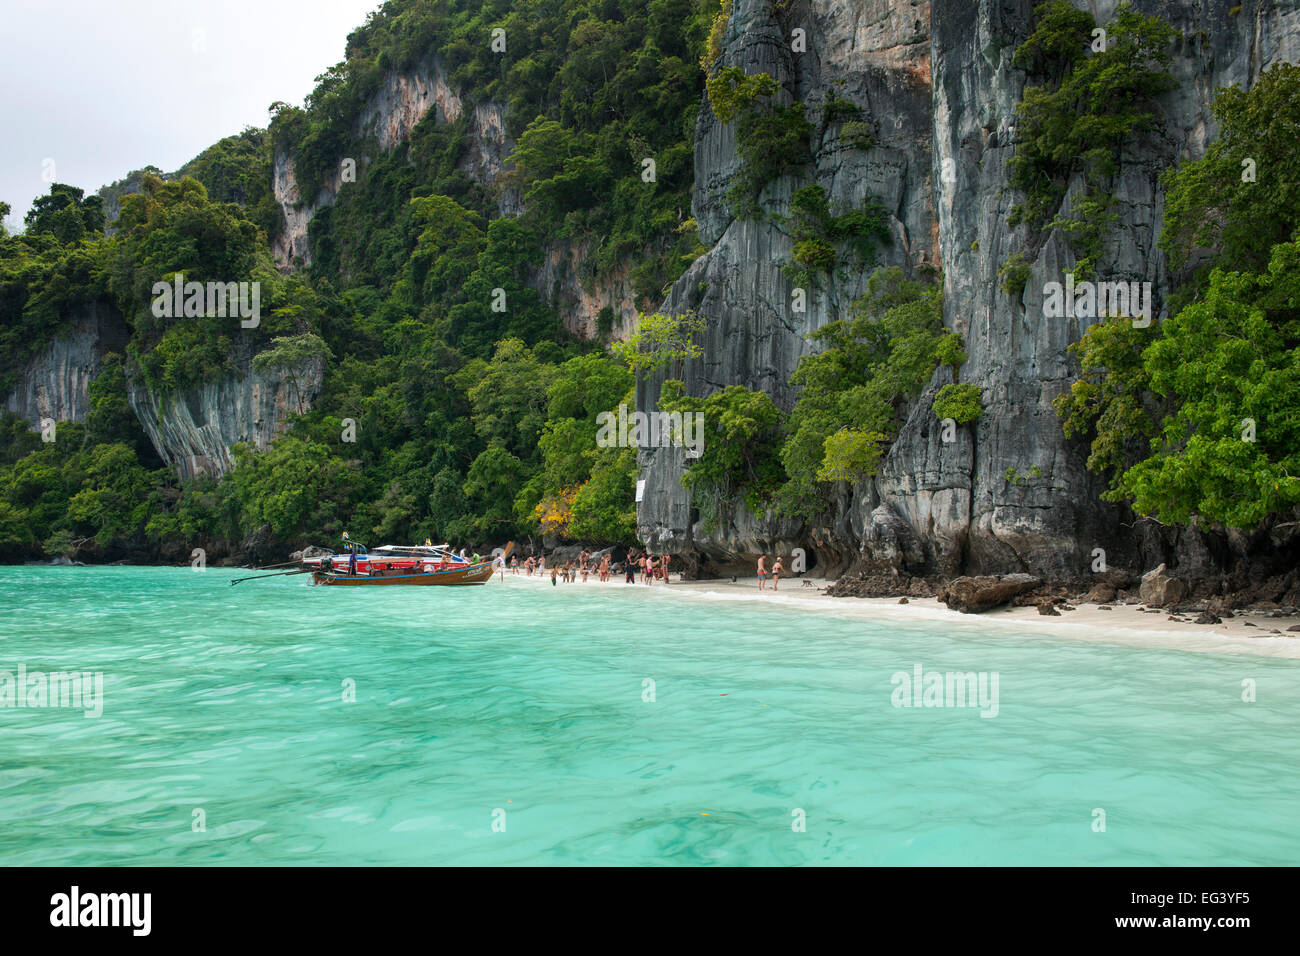 Tourist boats and the coast of Koh Phi Phi island in Thailand. Stock Photo